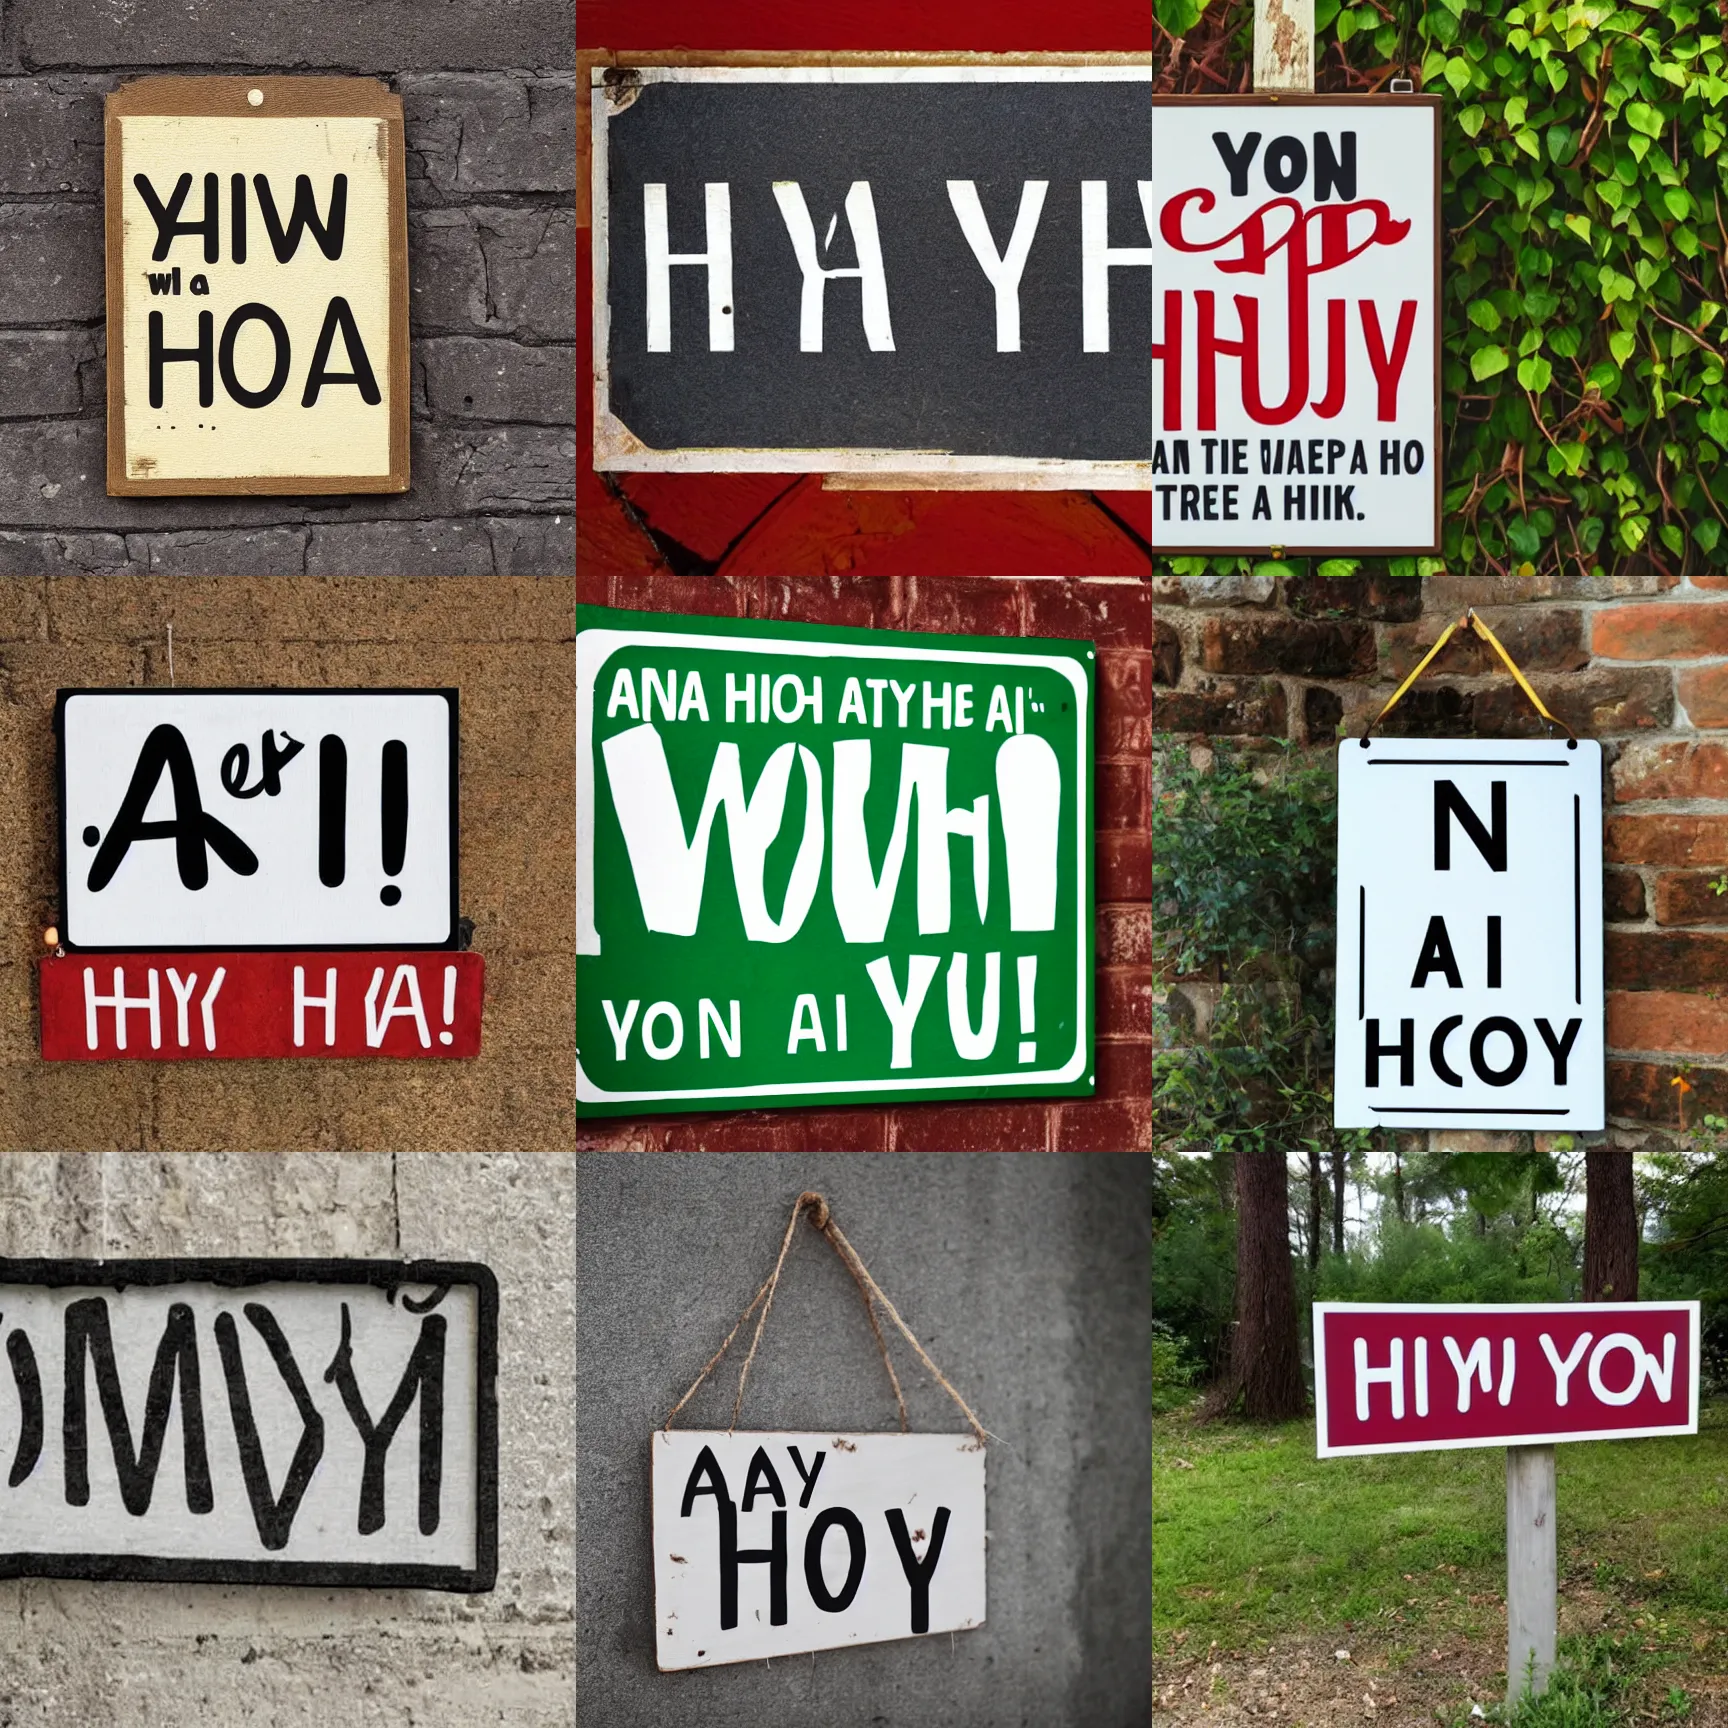 Prompt: a sign with text that says'a hyaa ho'w yon't hioiw?